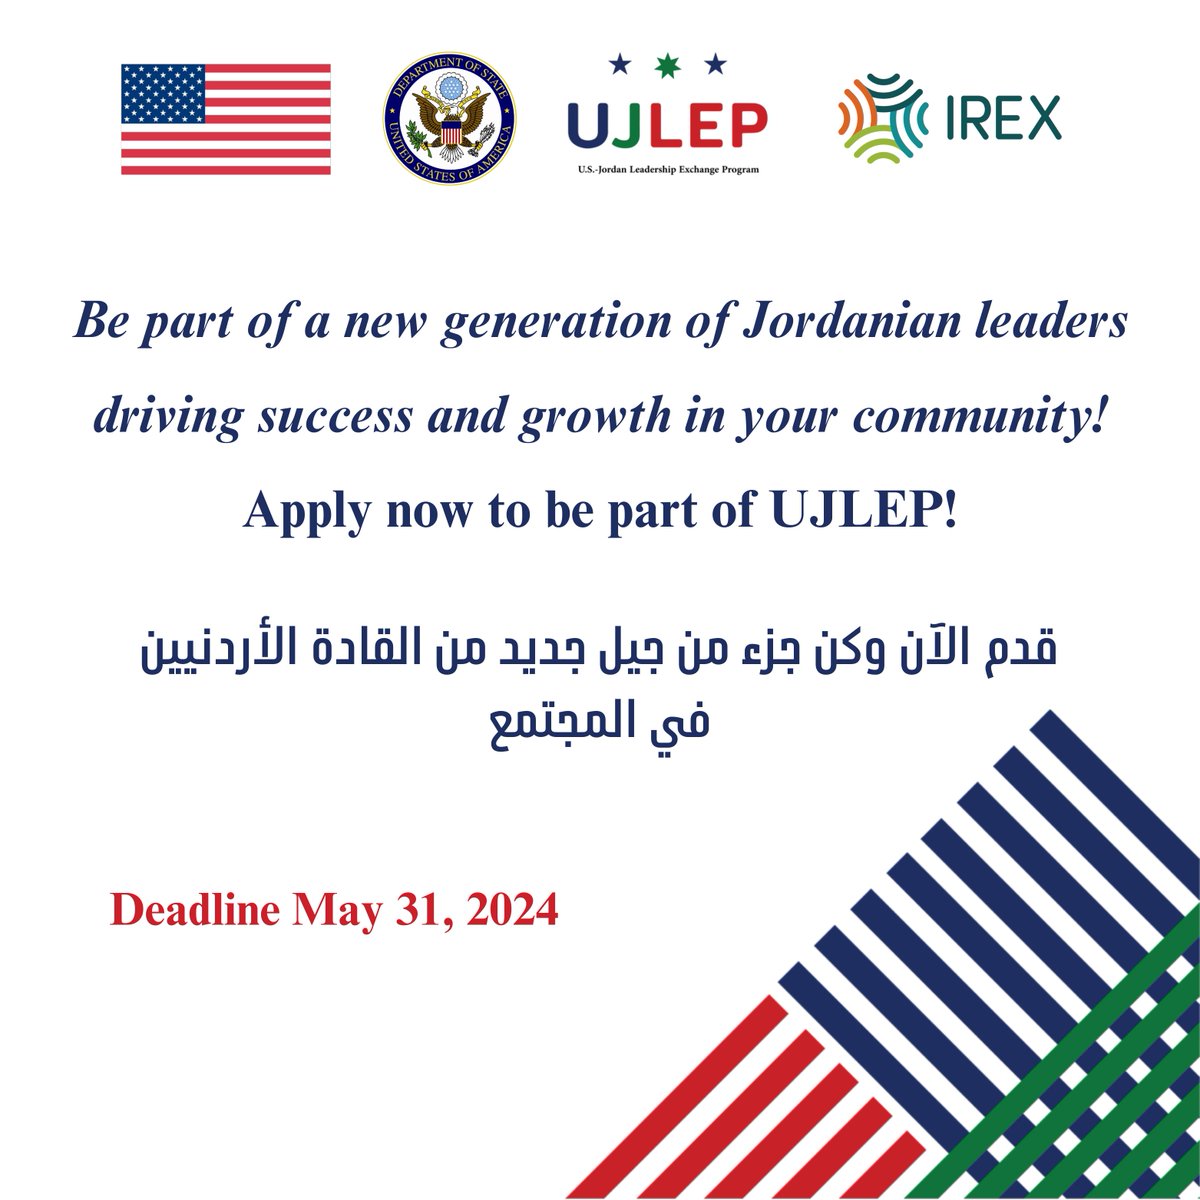 🌍Apply for the U.S.-Jordan Leadership Exchange Program (UJLEP) Cohort Three! Experience leadership training in Jordan, a tailored U.S. practicum, cultural immersion, and community projects. Apply by May 31: shorturl.at/BMUZ4

#LeadershipDevelopment #CulturalExchange